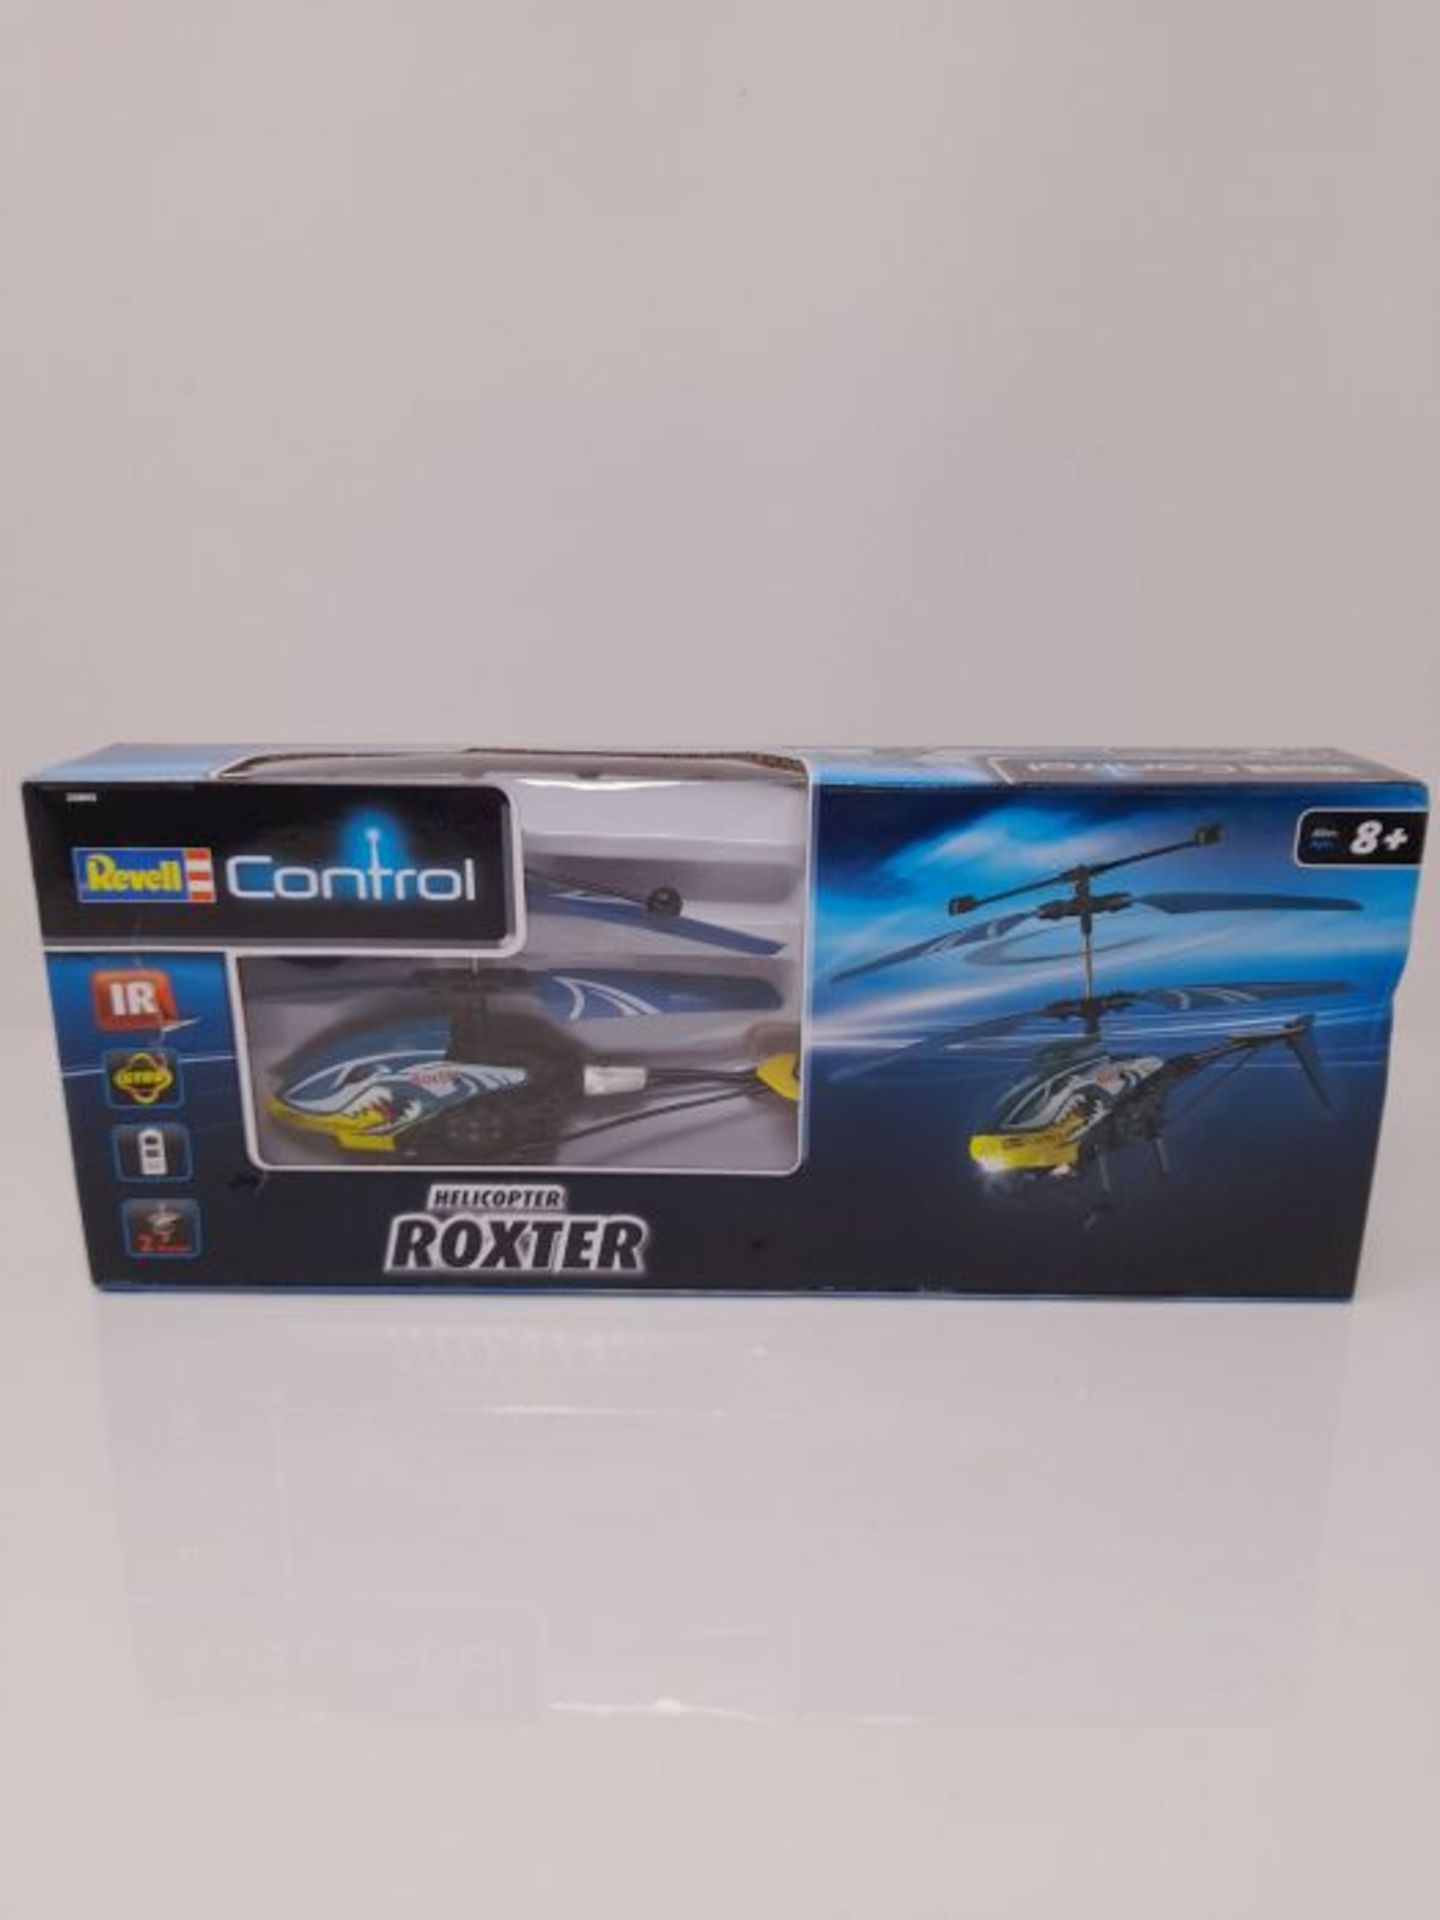 Revell Control 23892 Helicopter "Roxter" - Image 2 of 3